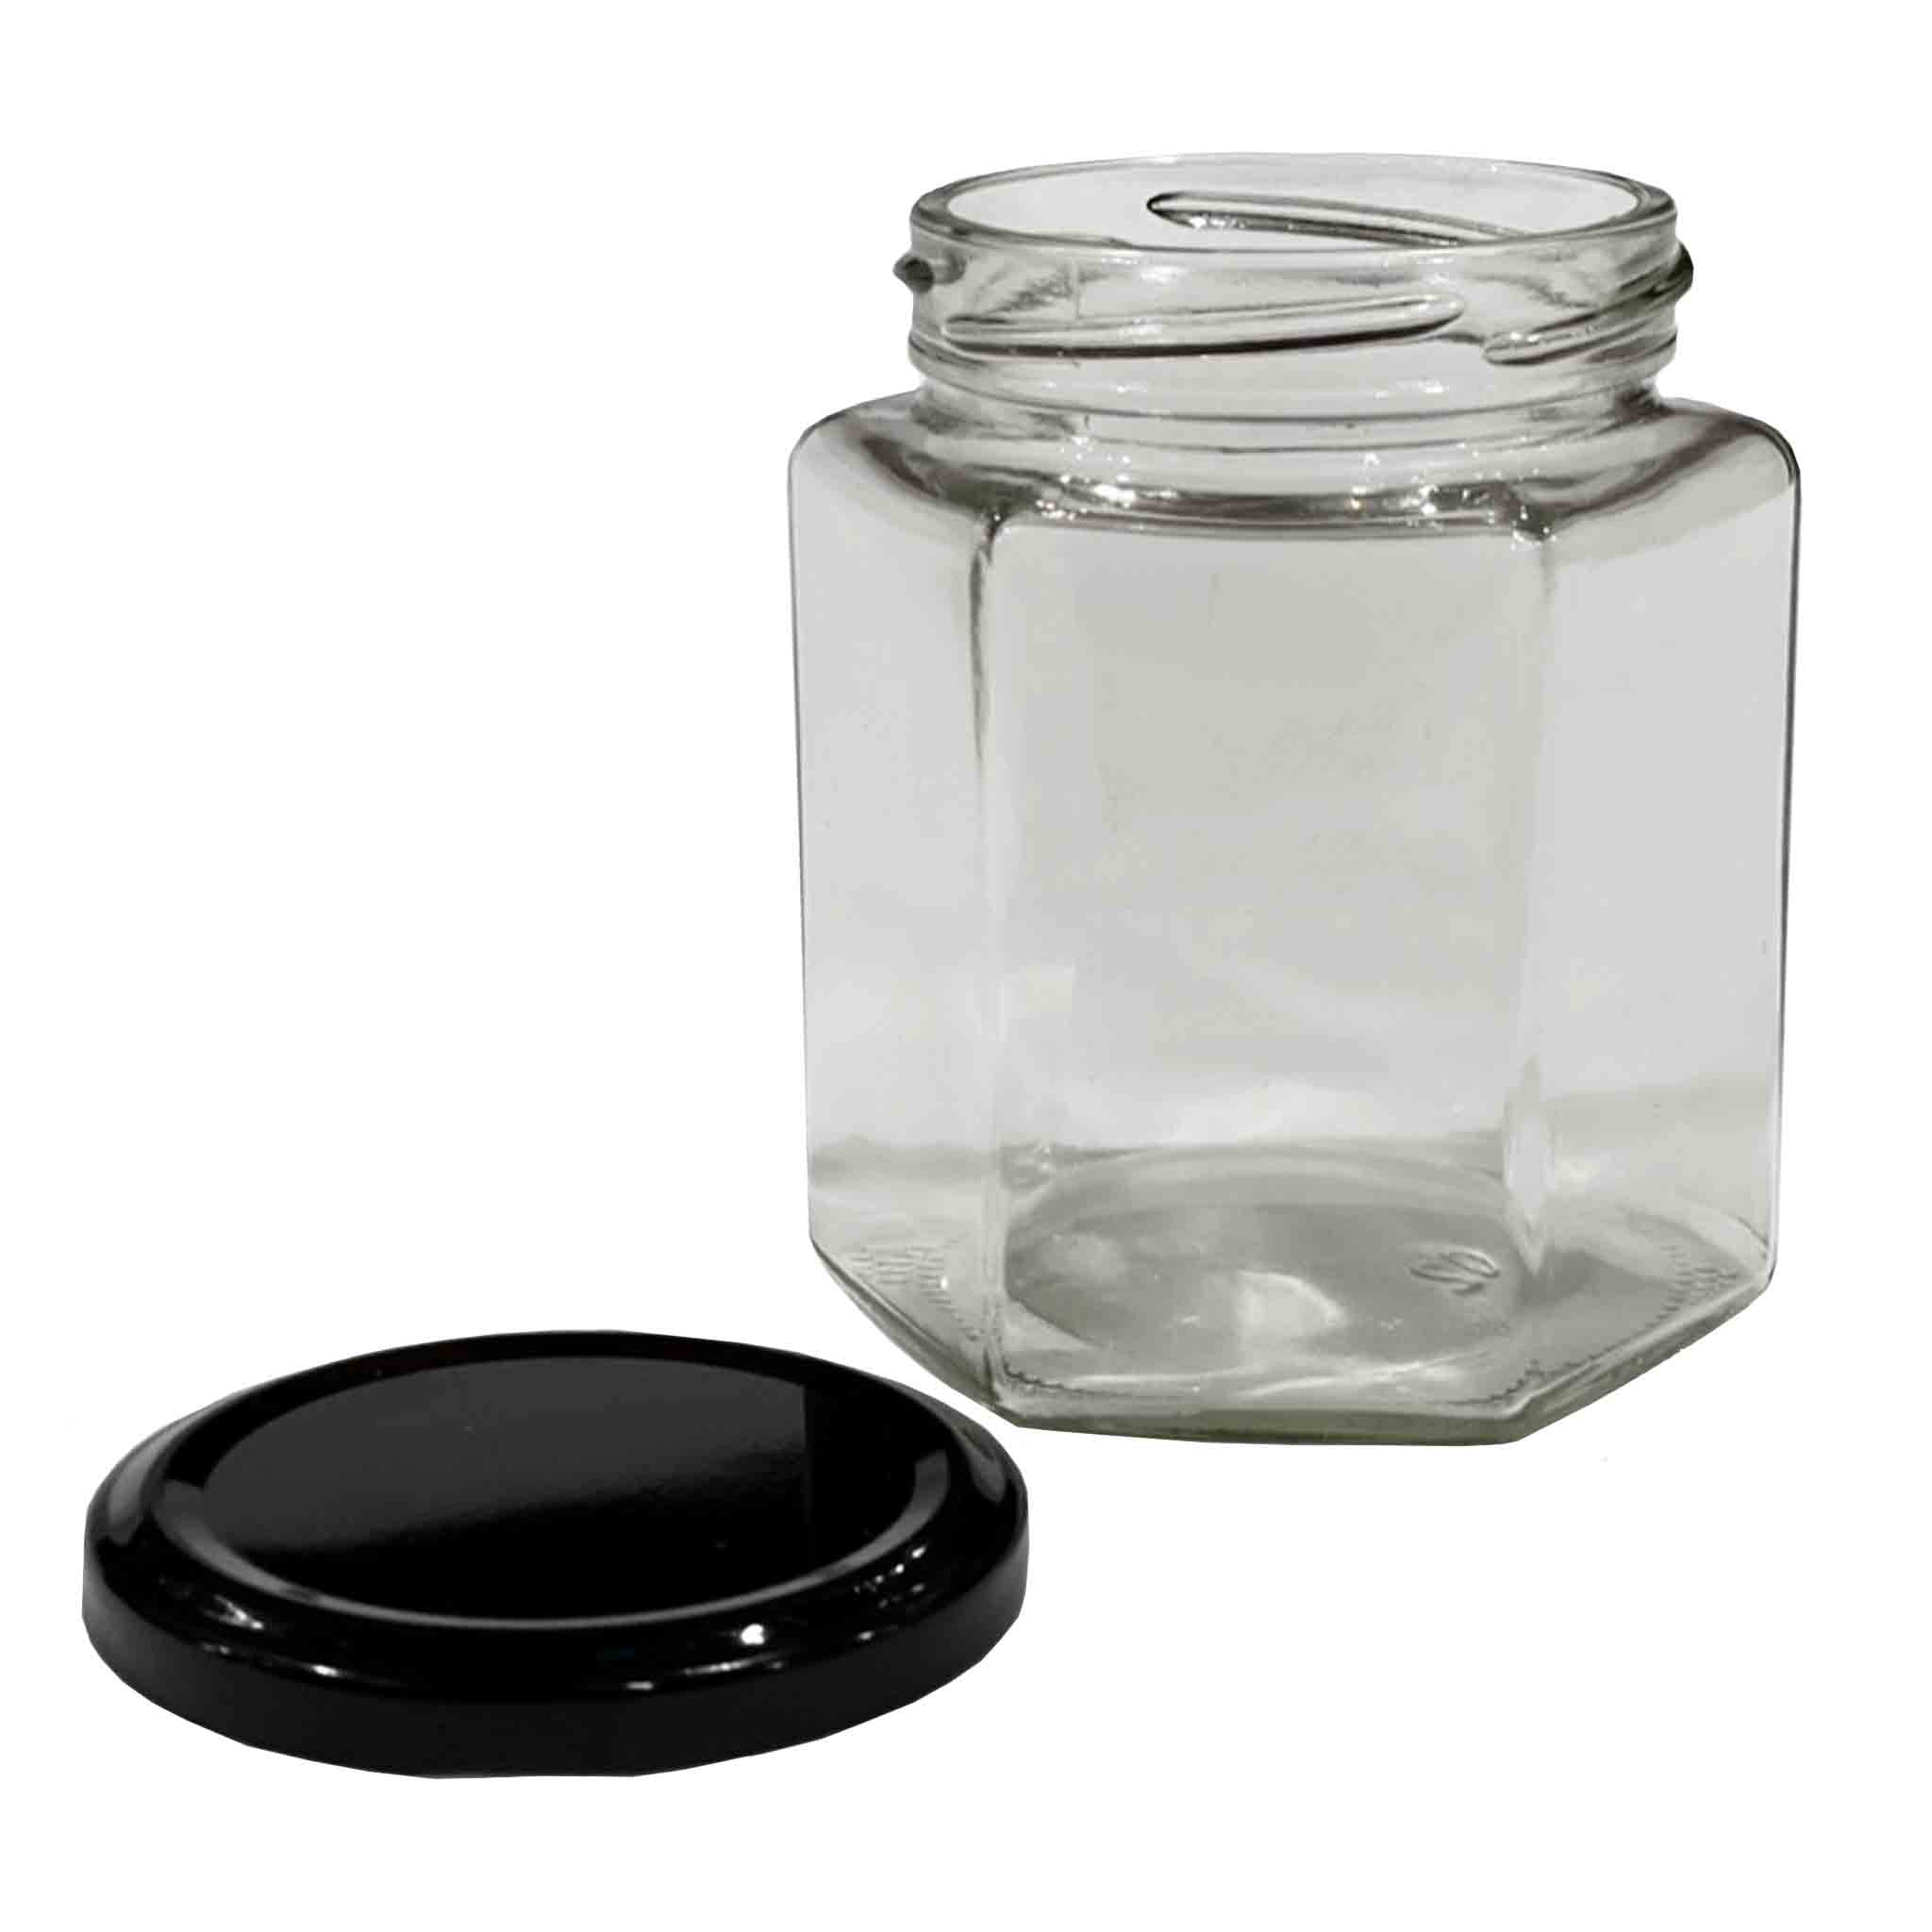 Honey Hexagonal Clear Glass Jar - 380ml (72 Pack) - Processing collection by Buzzbee Beekeeping Supplies